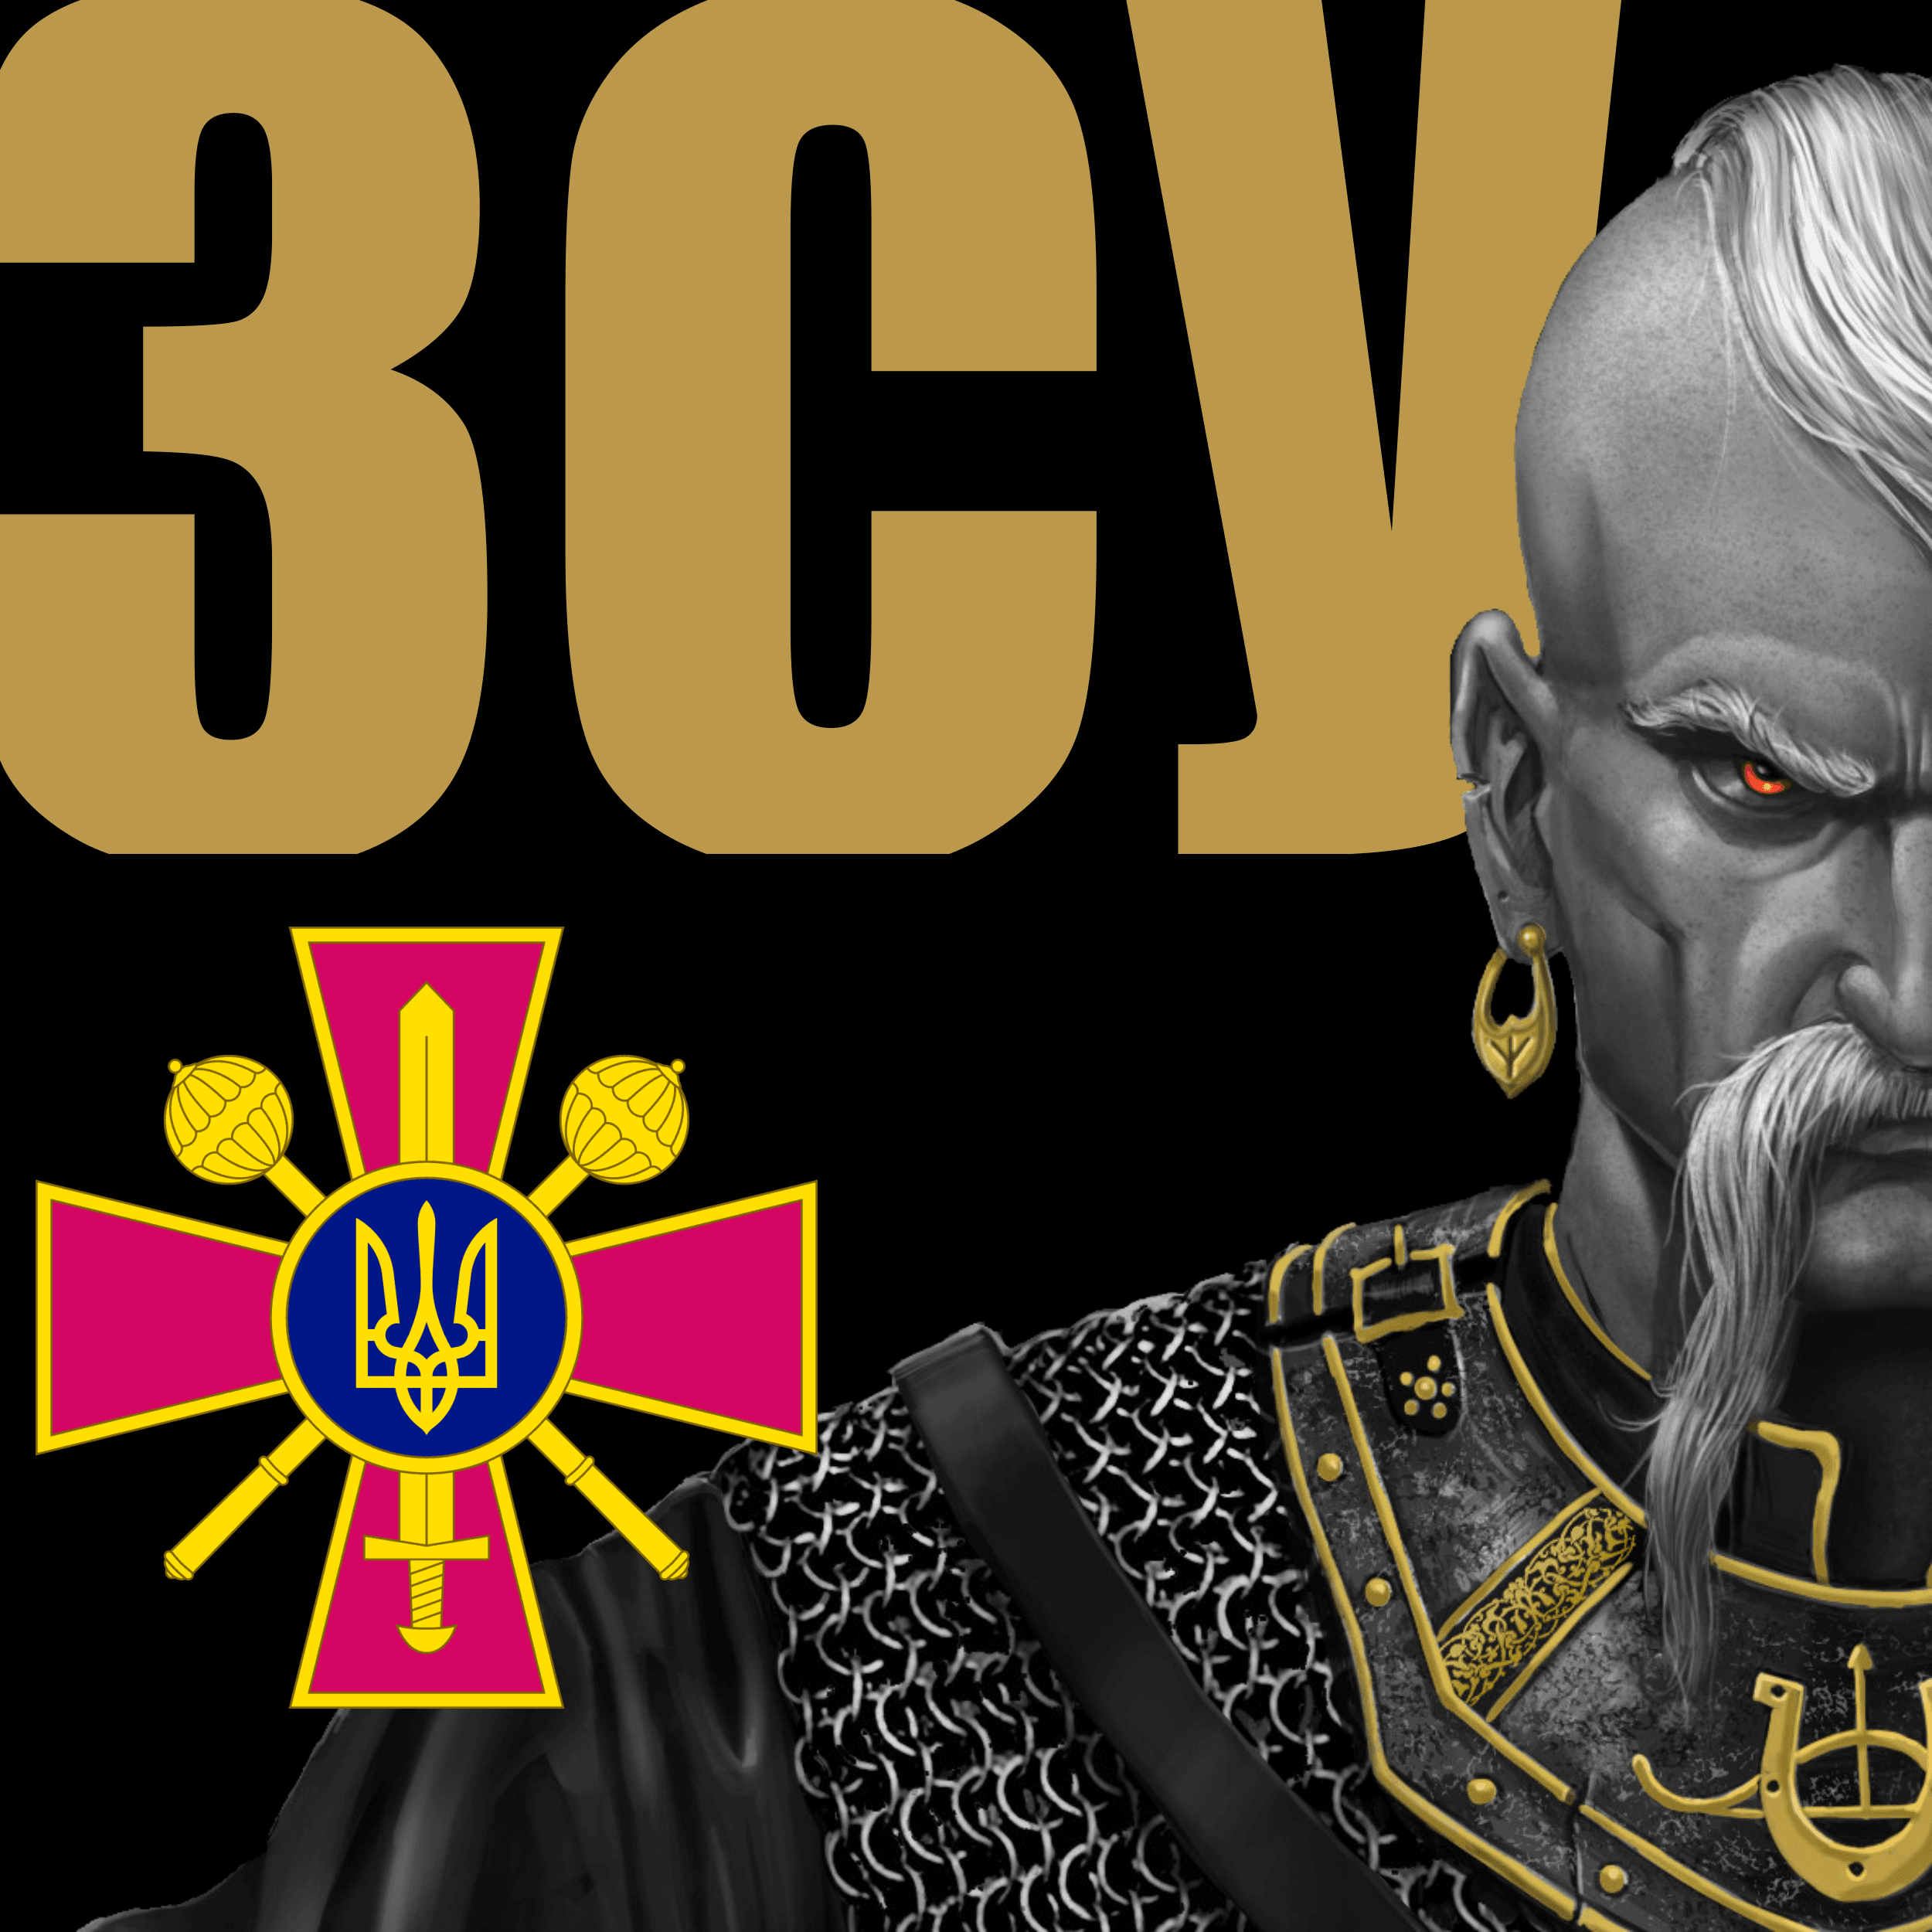 Ukrainian Cossack of the Armed Forces